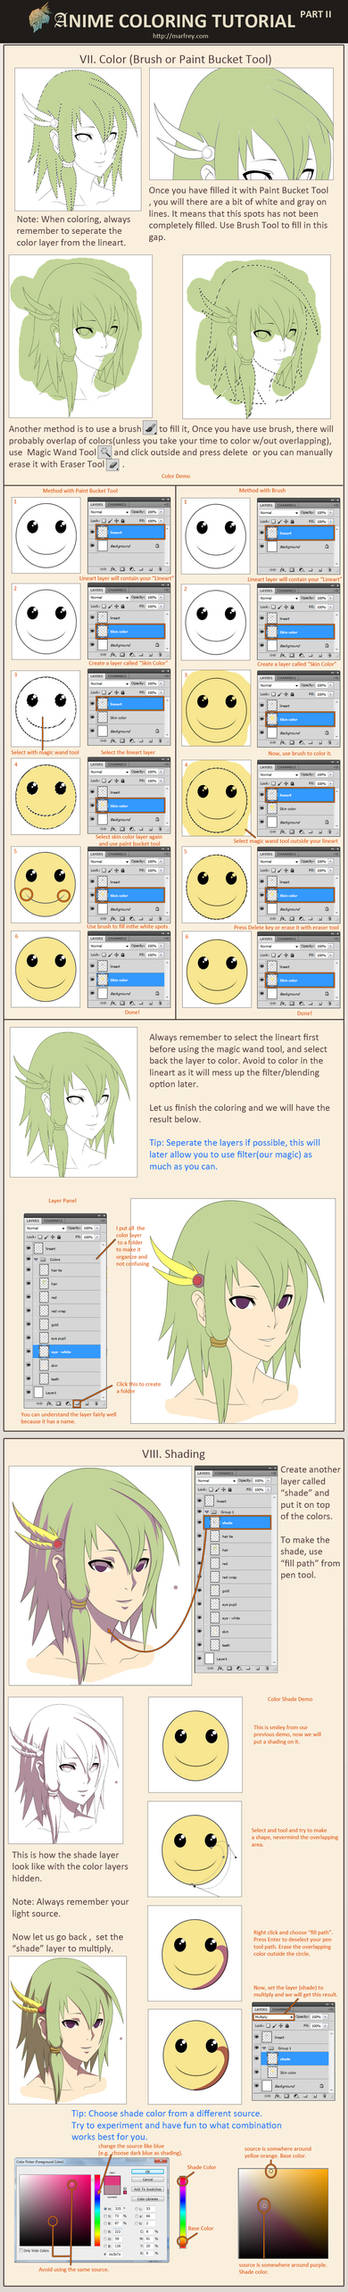 Anime Coloring Tutorial Part 2